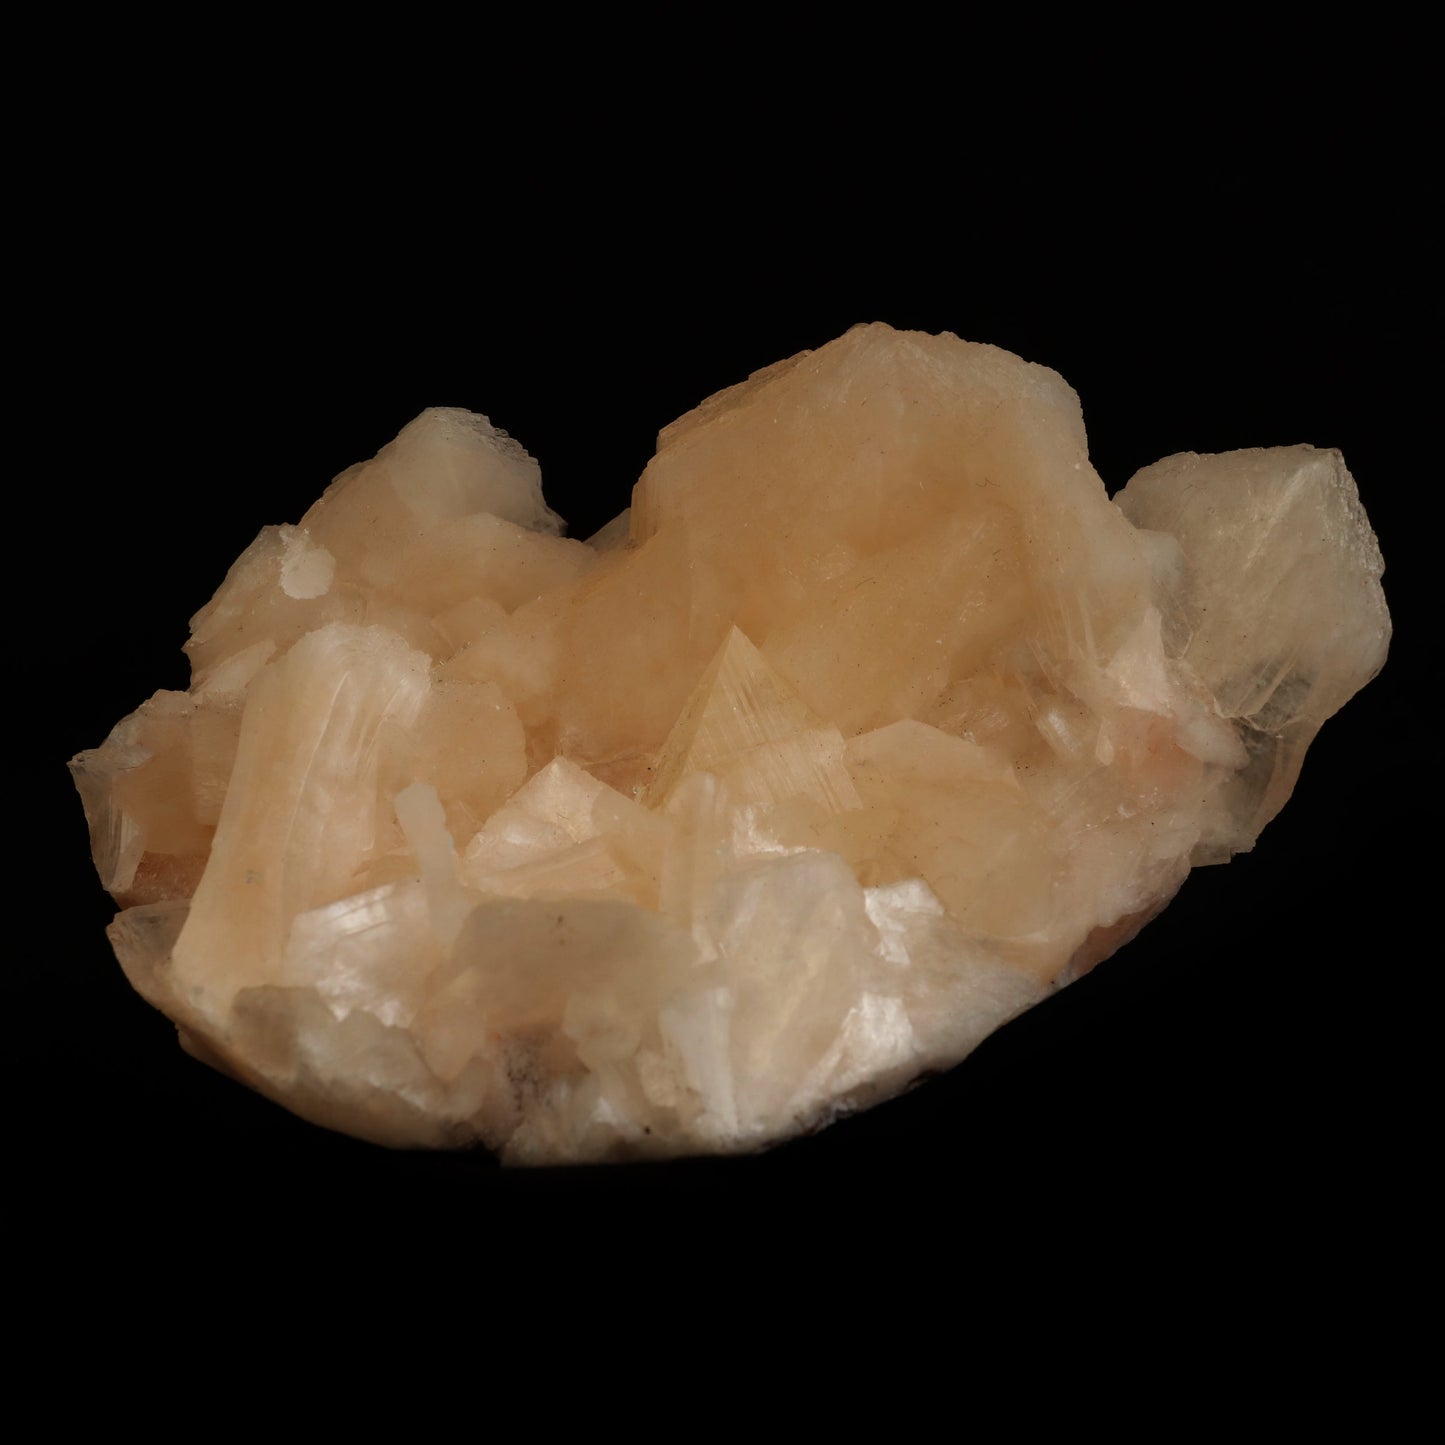 Powellite (Flurocent Mineral) With Stilbite Natural Mineral Specimen …  https://www.superbminerals.us/products/powellite-flurocent-mineral-with-stilbite-natural-mineral-specimen-b-5034  Features:&nbsp;Powellite is one of the rarest and most valuable minerals found in India's famous Deccan Trap basalts. This pair of beautiful yellow-orange crystals is nestled between and on top of exceedingly shiny and iridescent white Stilbite blades.Powellites feature a dazzling, golden fluorescence, 